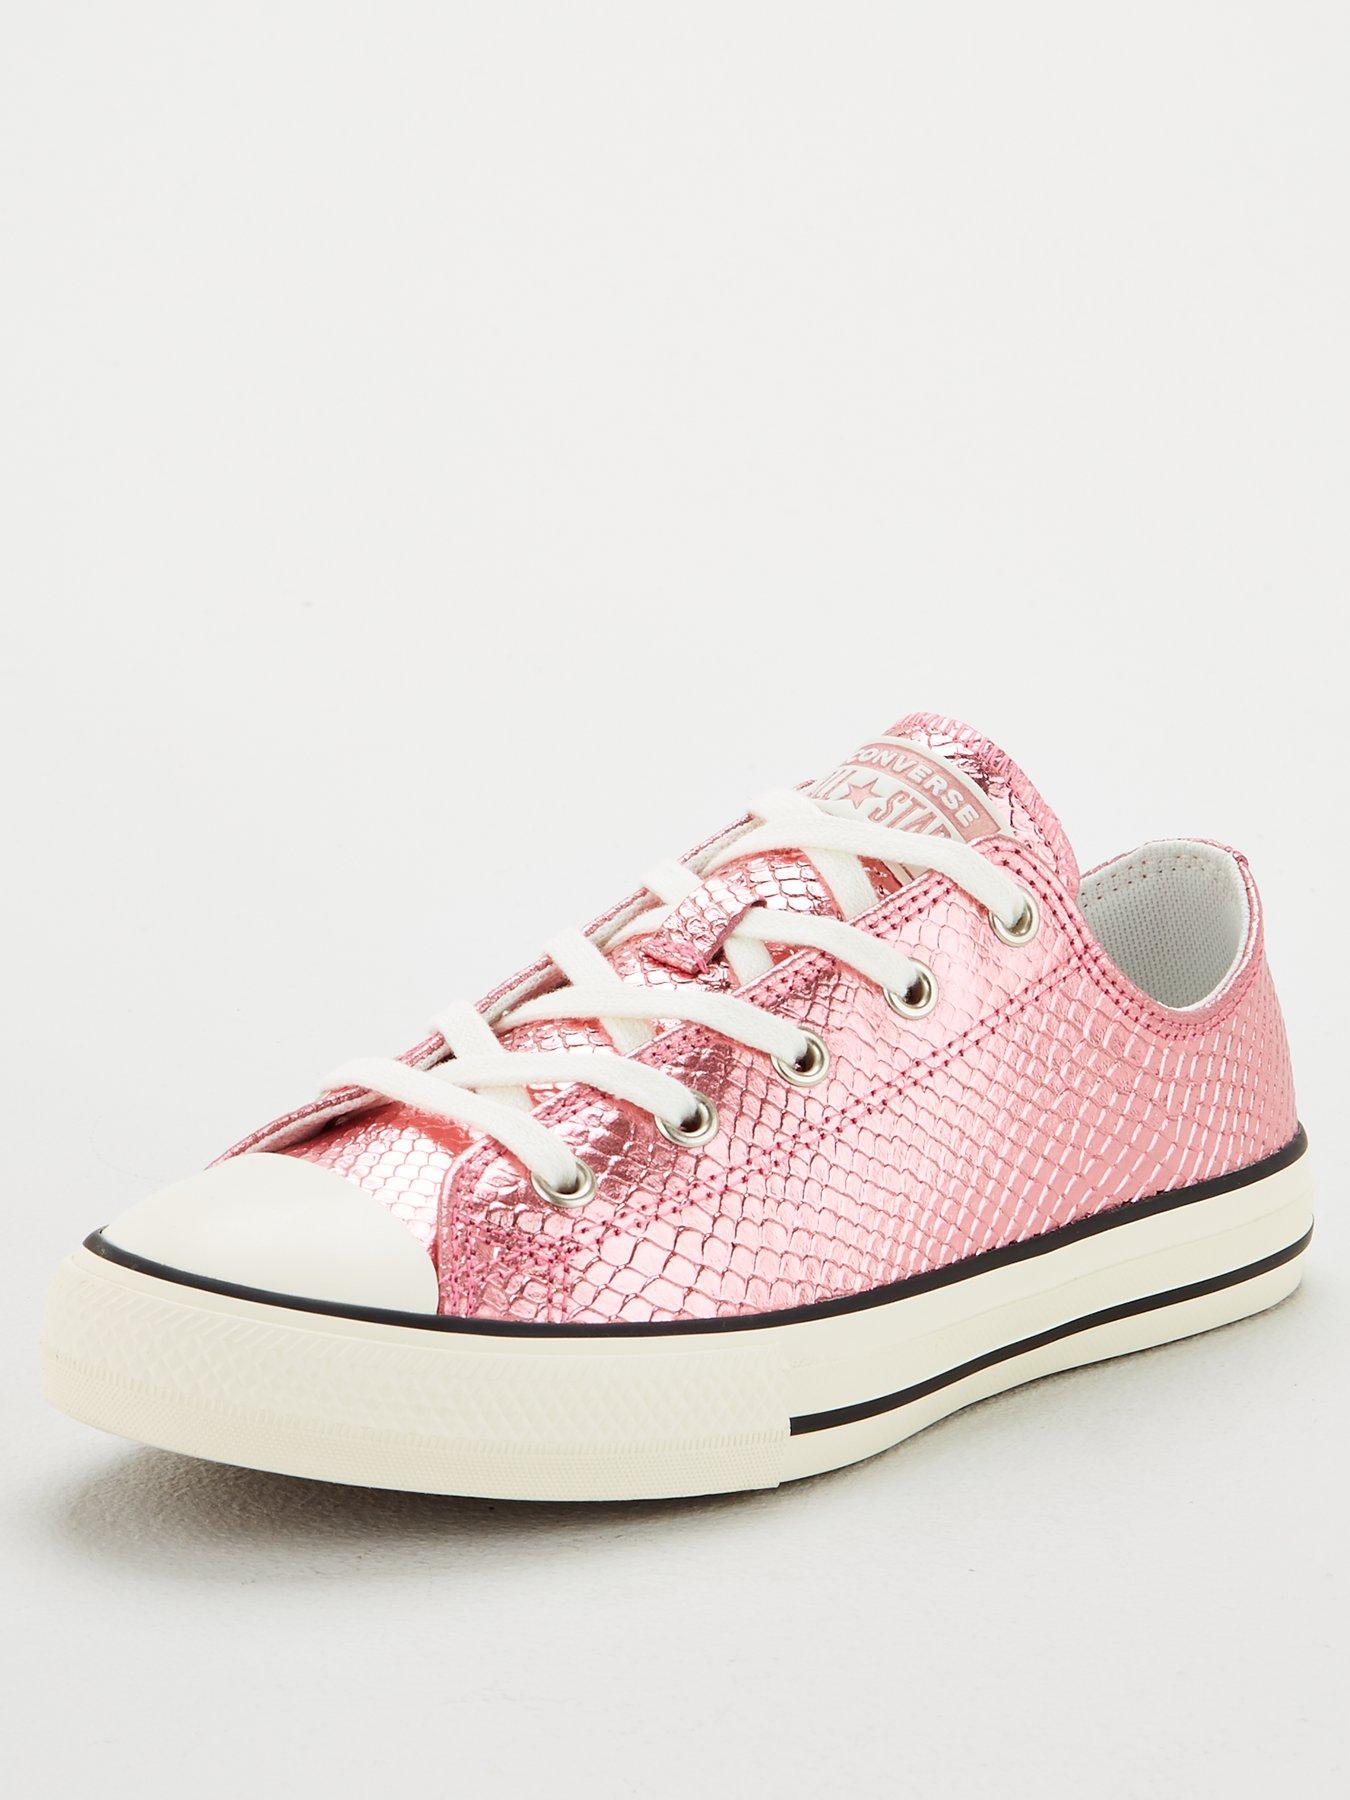 sports authority converse chuck taylor